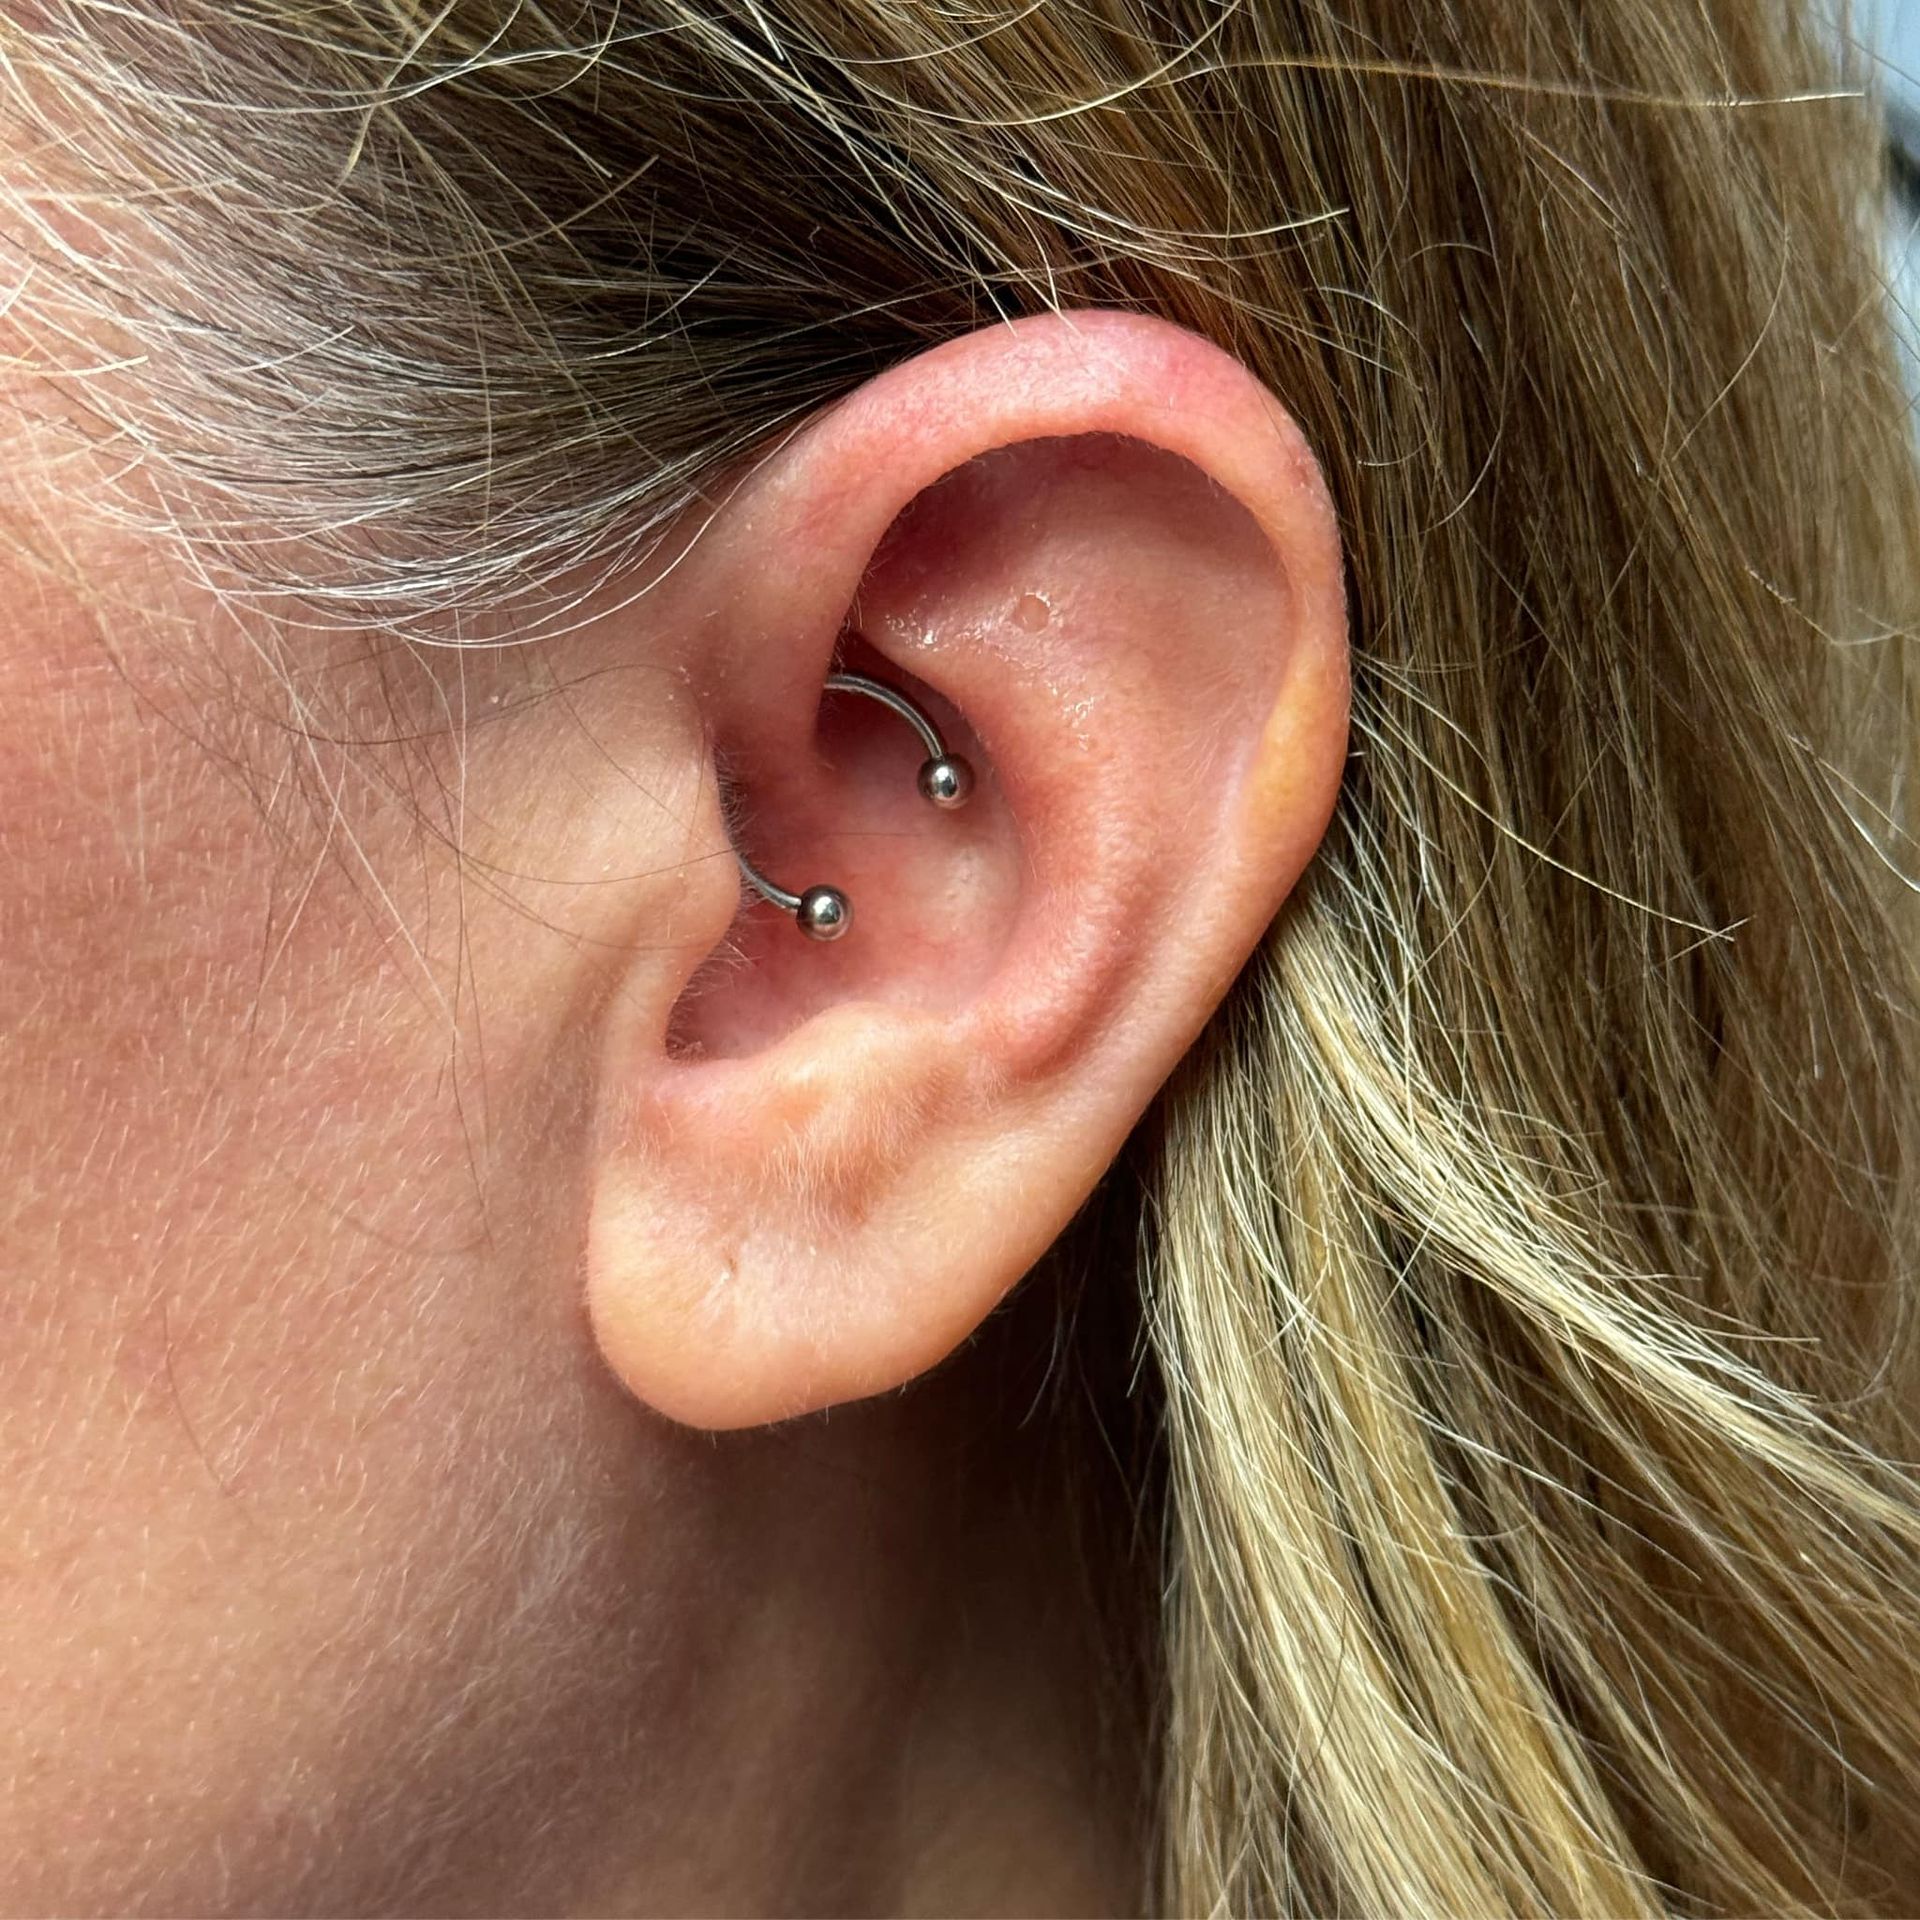 A Close-Up Of A Woman's Ear With A Lot Of Piercings - Burlington, NC - Inferno Ink Tattoo